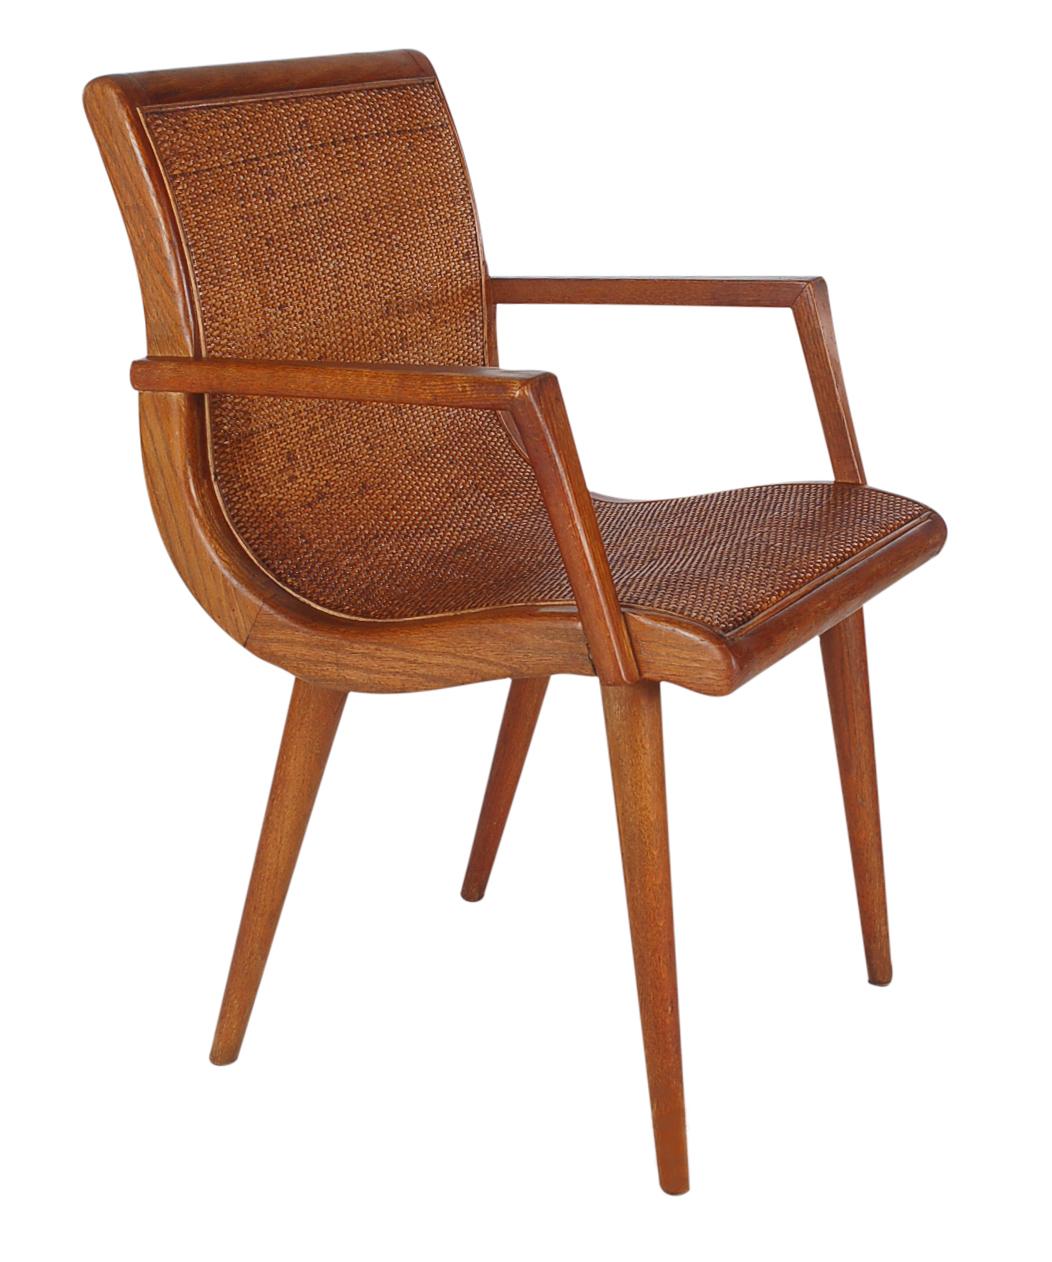 Pair of Mid-Century Modern Cane and Oak Danish Modern Style Armchairs 1